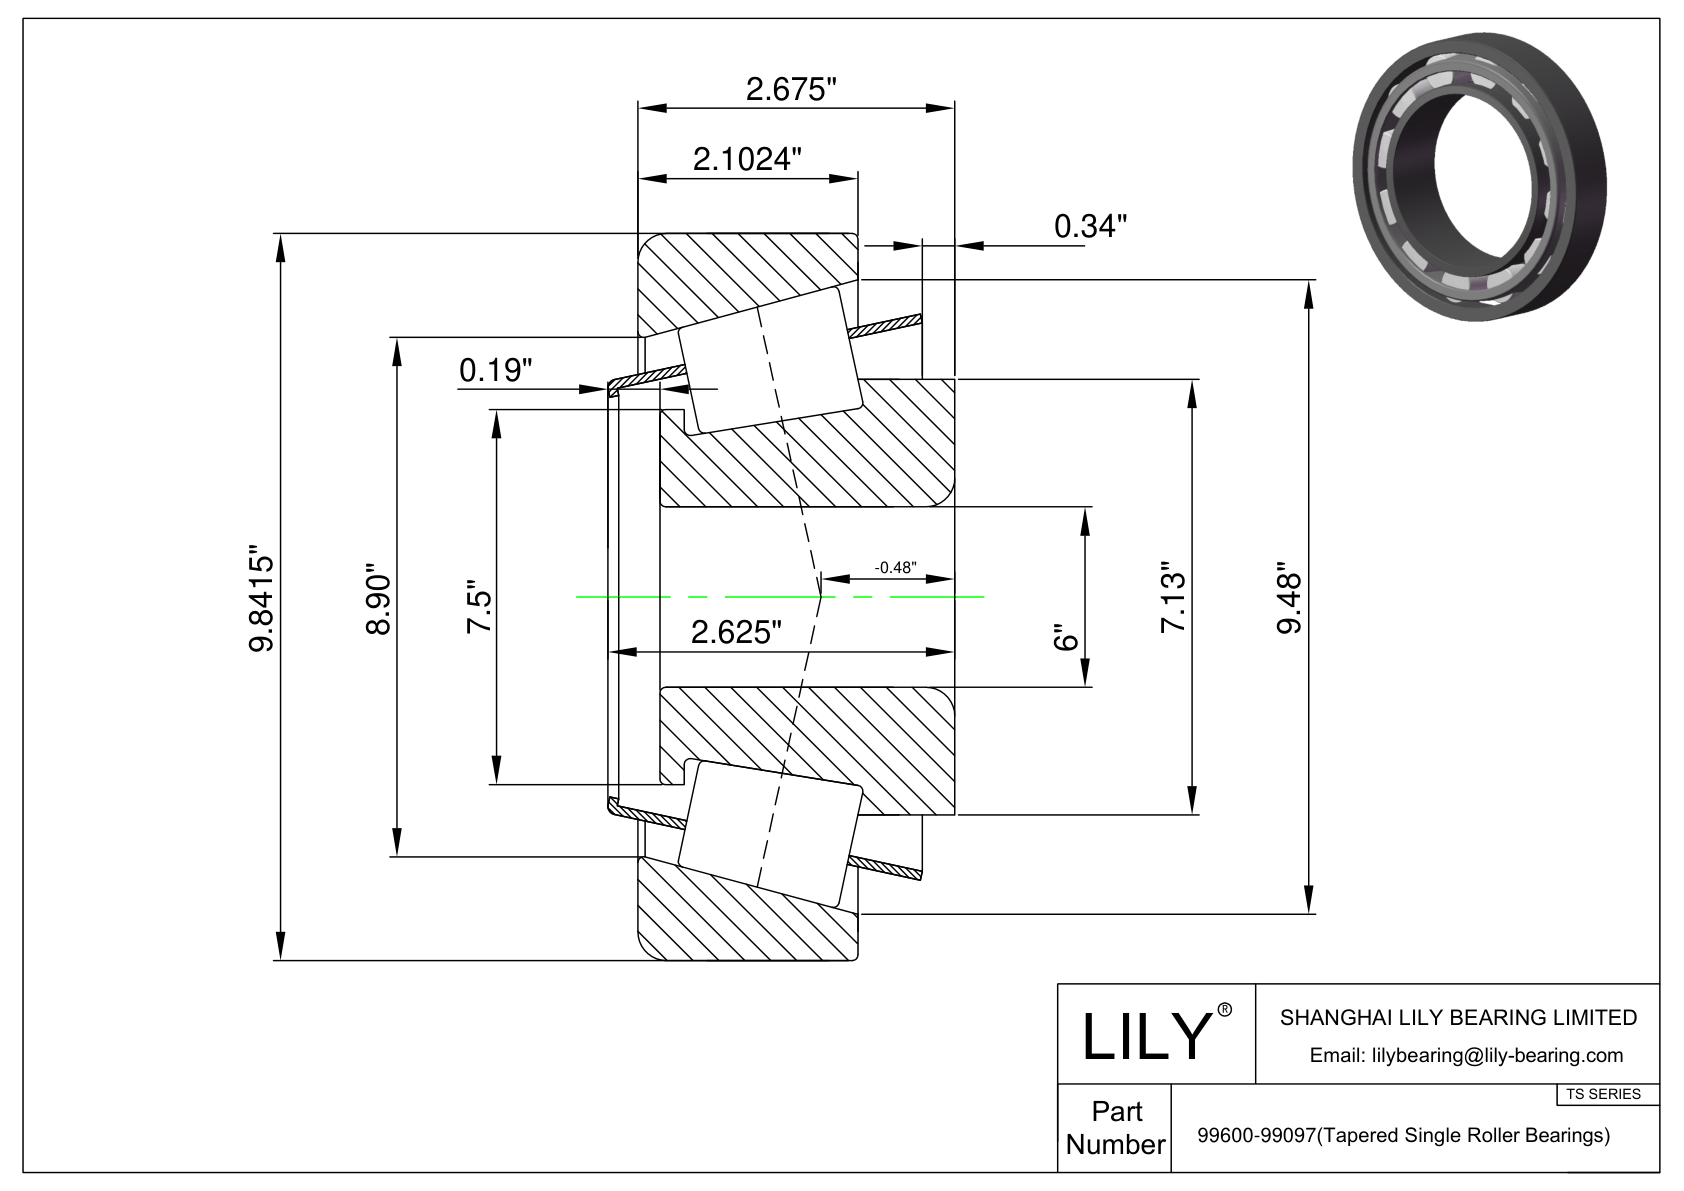 99600-99097 TS (Tapered Single Roller Bearings) (Imperial) cad drawing